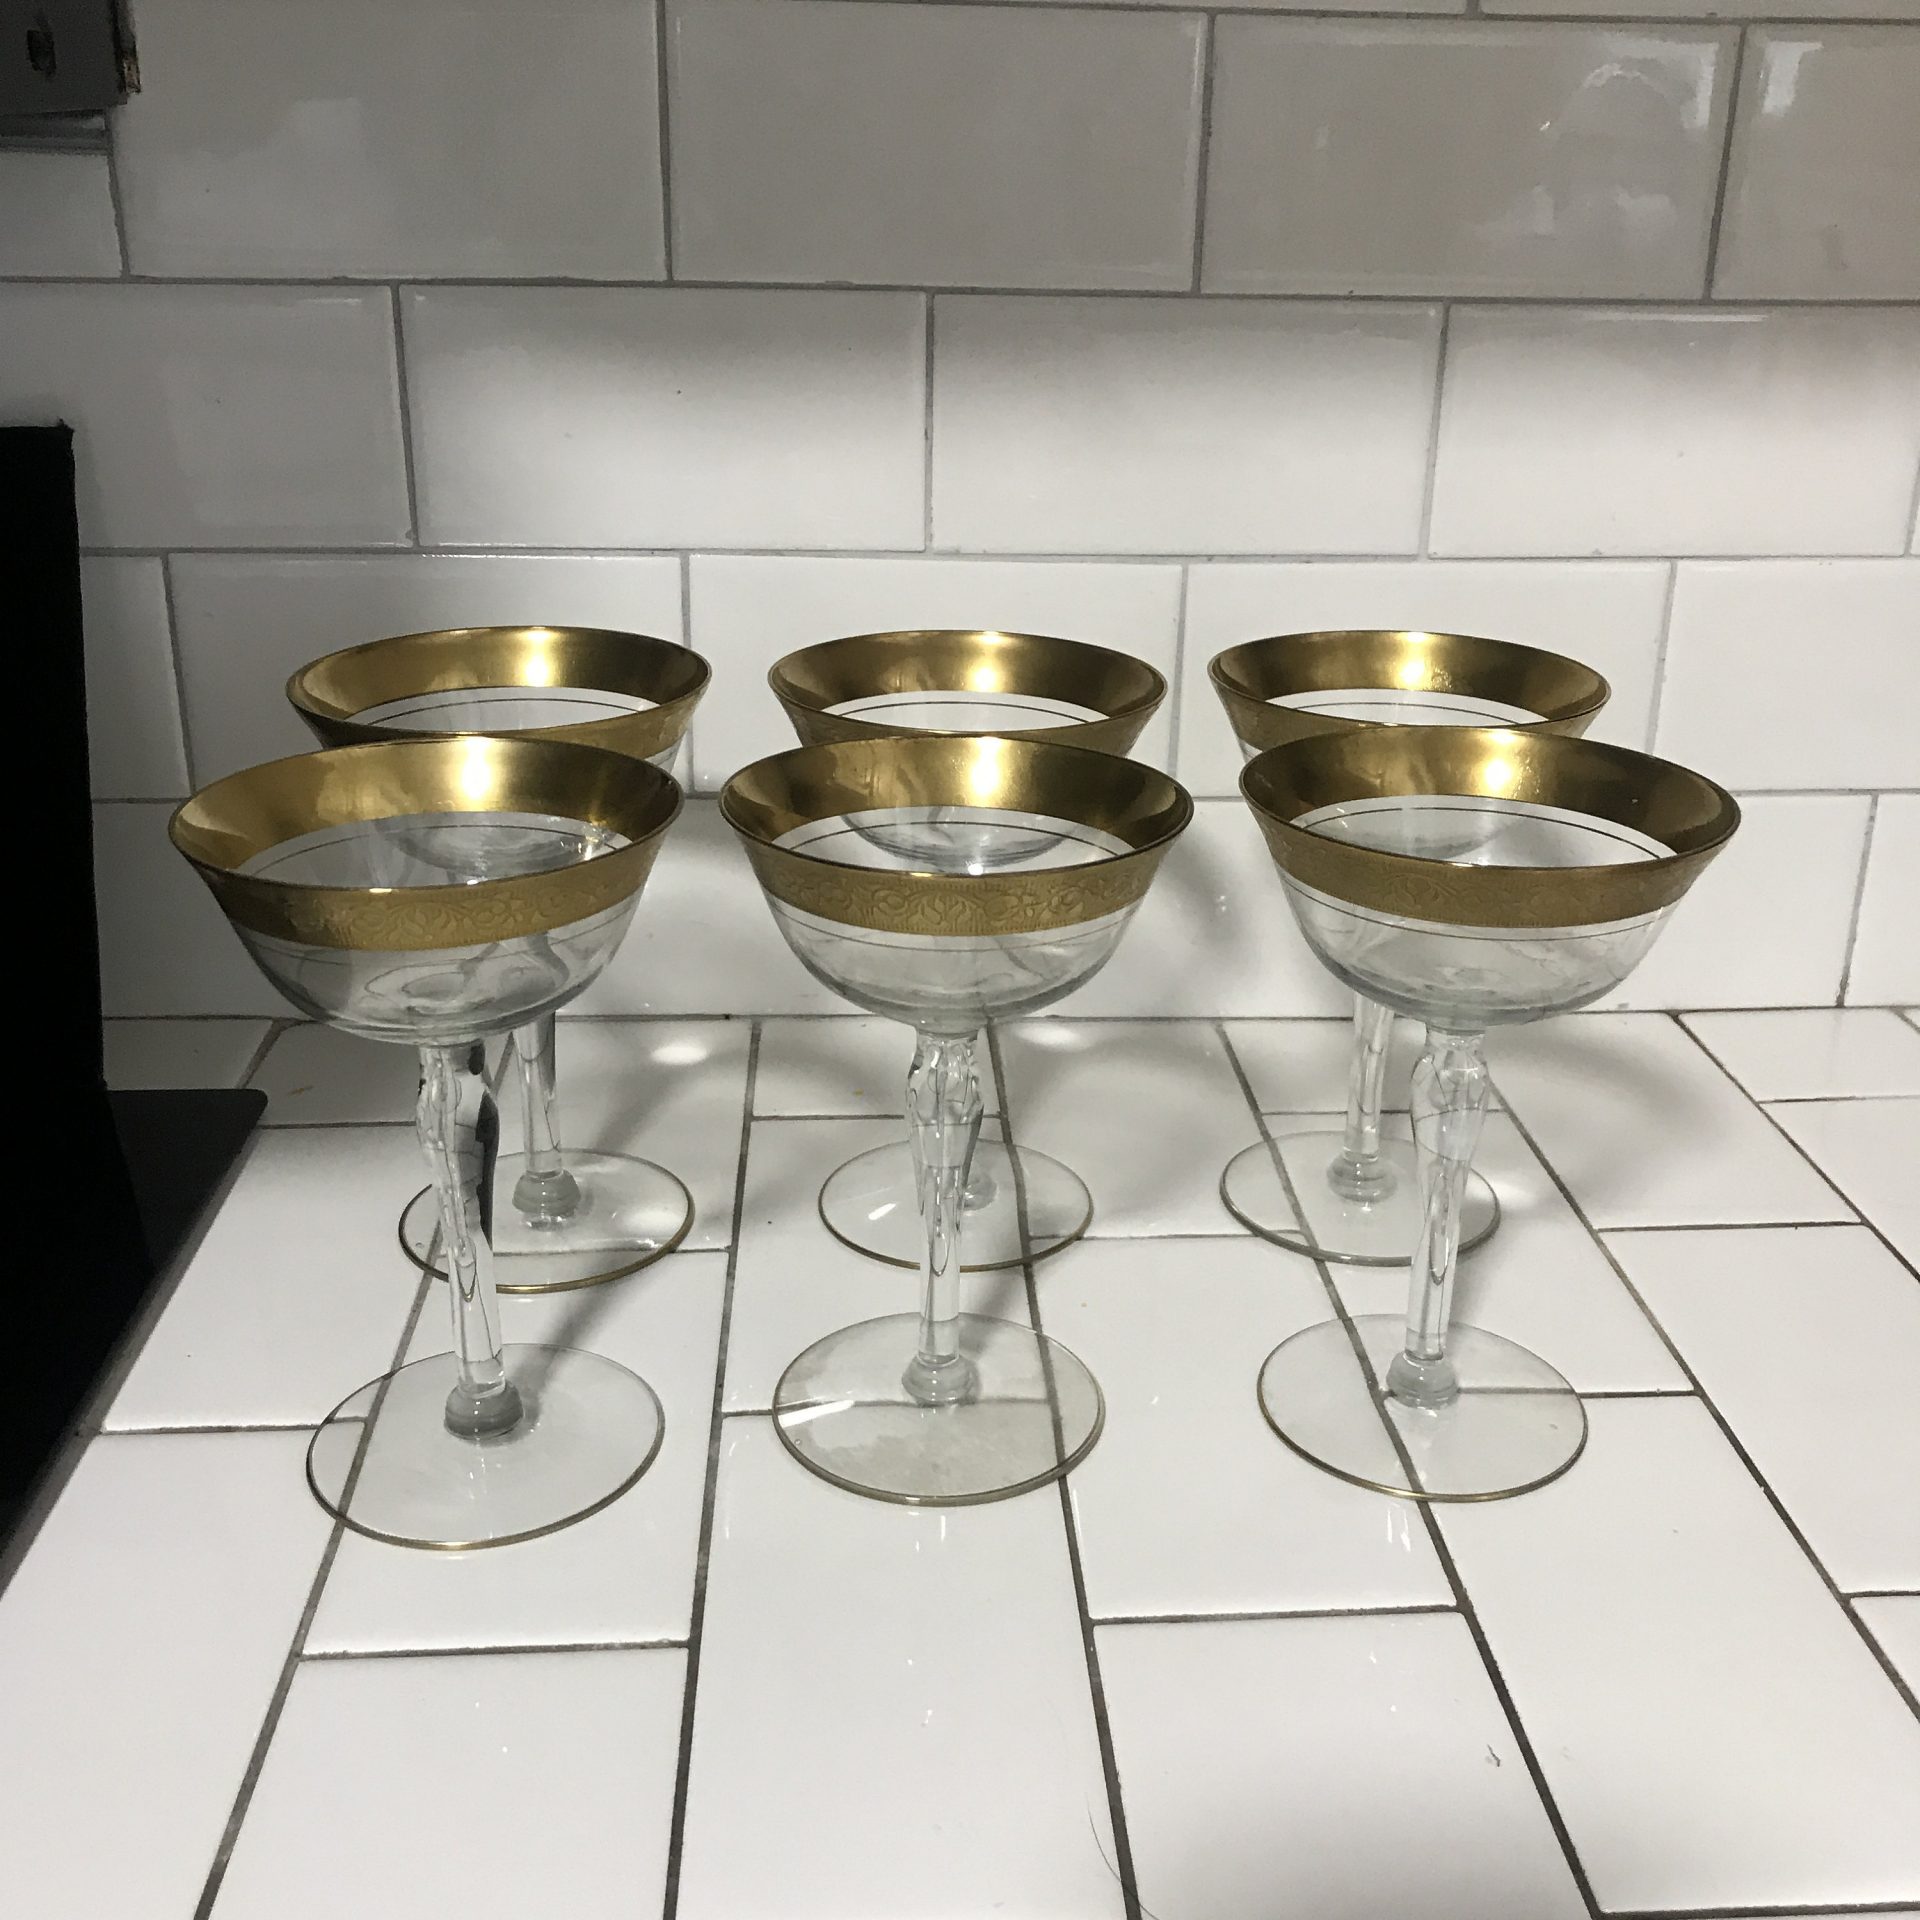 https://www.truevintageantiques.com/wp-content/uploads/2021/05/vintage-set-of-6-wine-glasses-shallow-champagne-paneled-crystal-with-heavy-gold-ornate-trim-display-collectible-evening-dining-609909551-scaled.jpg